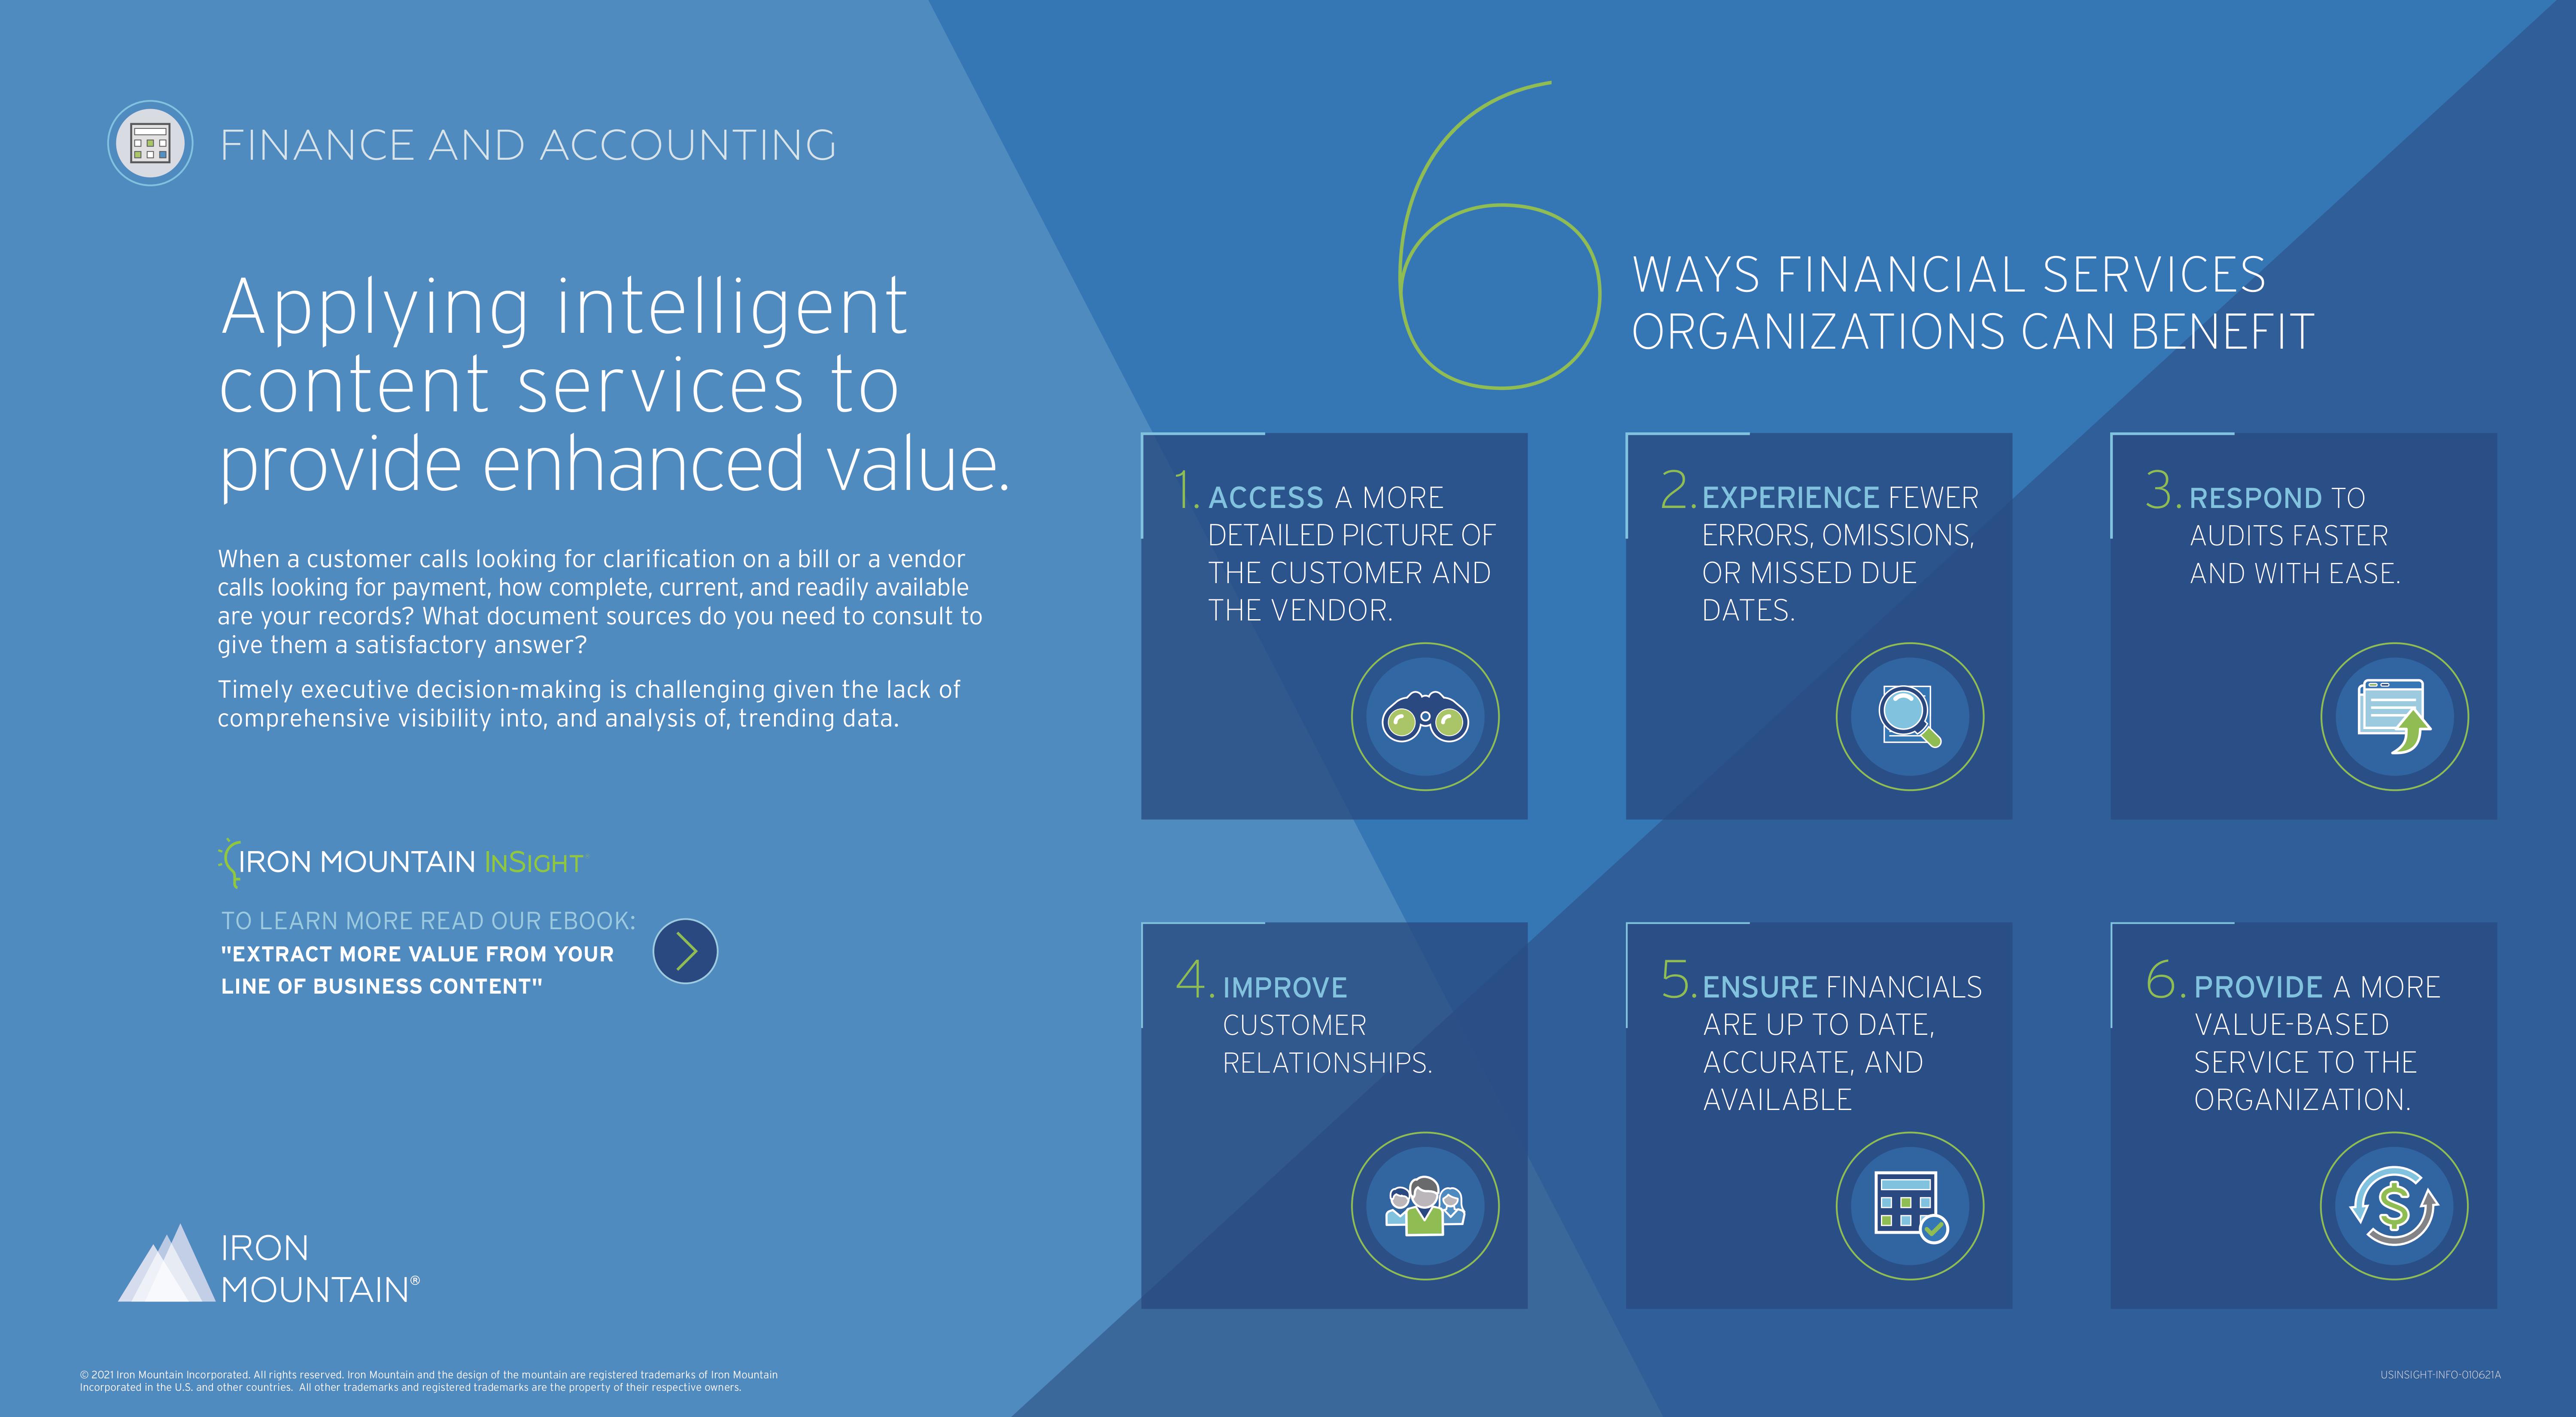 Intelligent Content Services: Six Ways Financial Services Organizations Can Benefit